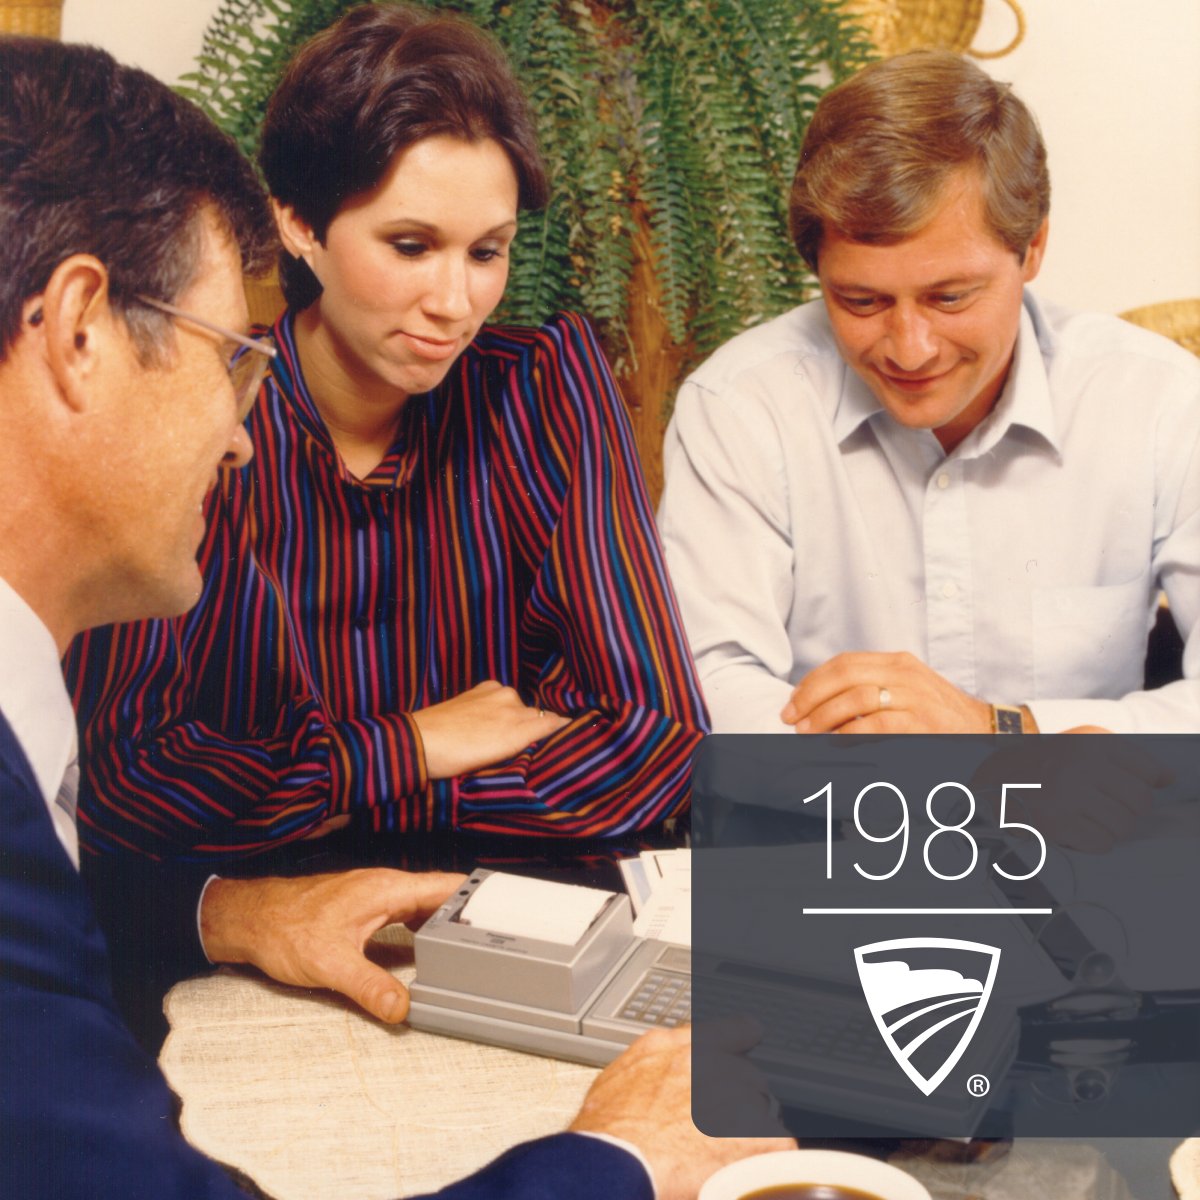 Our financial reps have a long history of helping members on their financial journey. Check out this photo from 1985 of a rep helping a member with a handheld computer! #Modernsince1883 #Modernpioneer